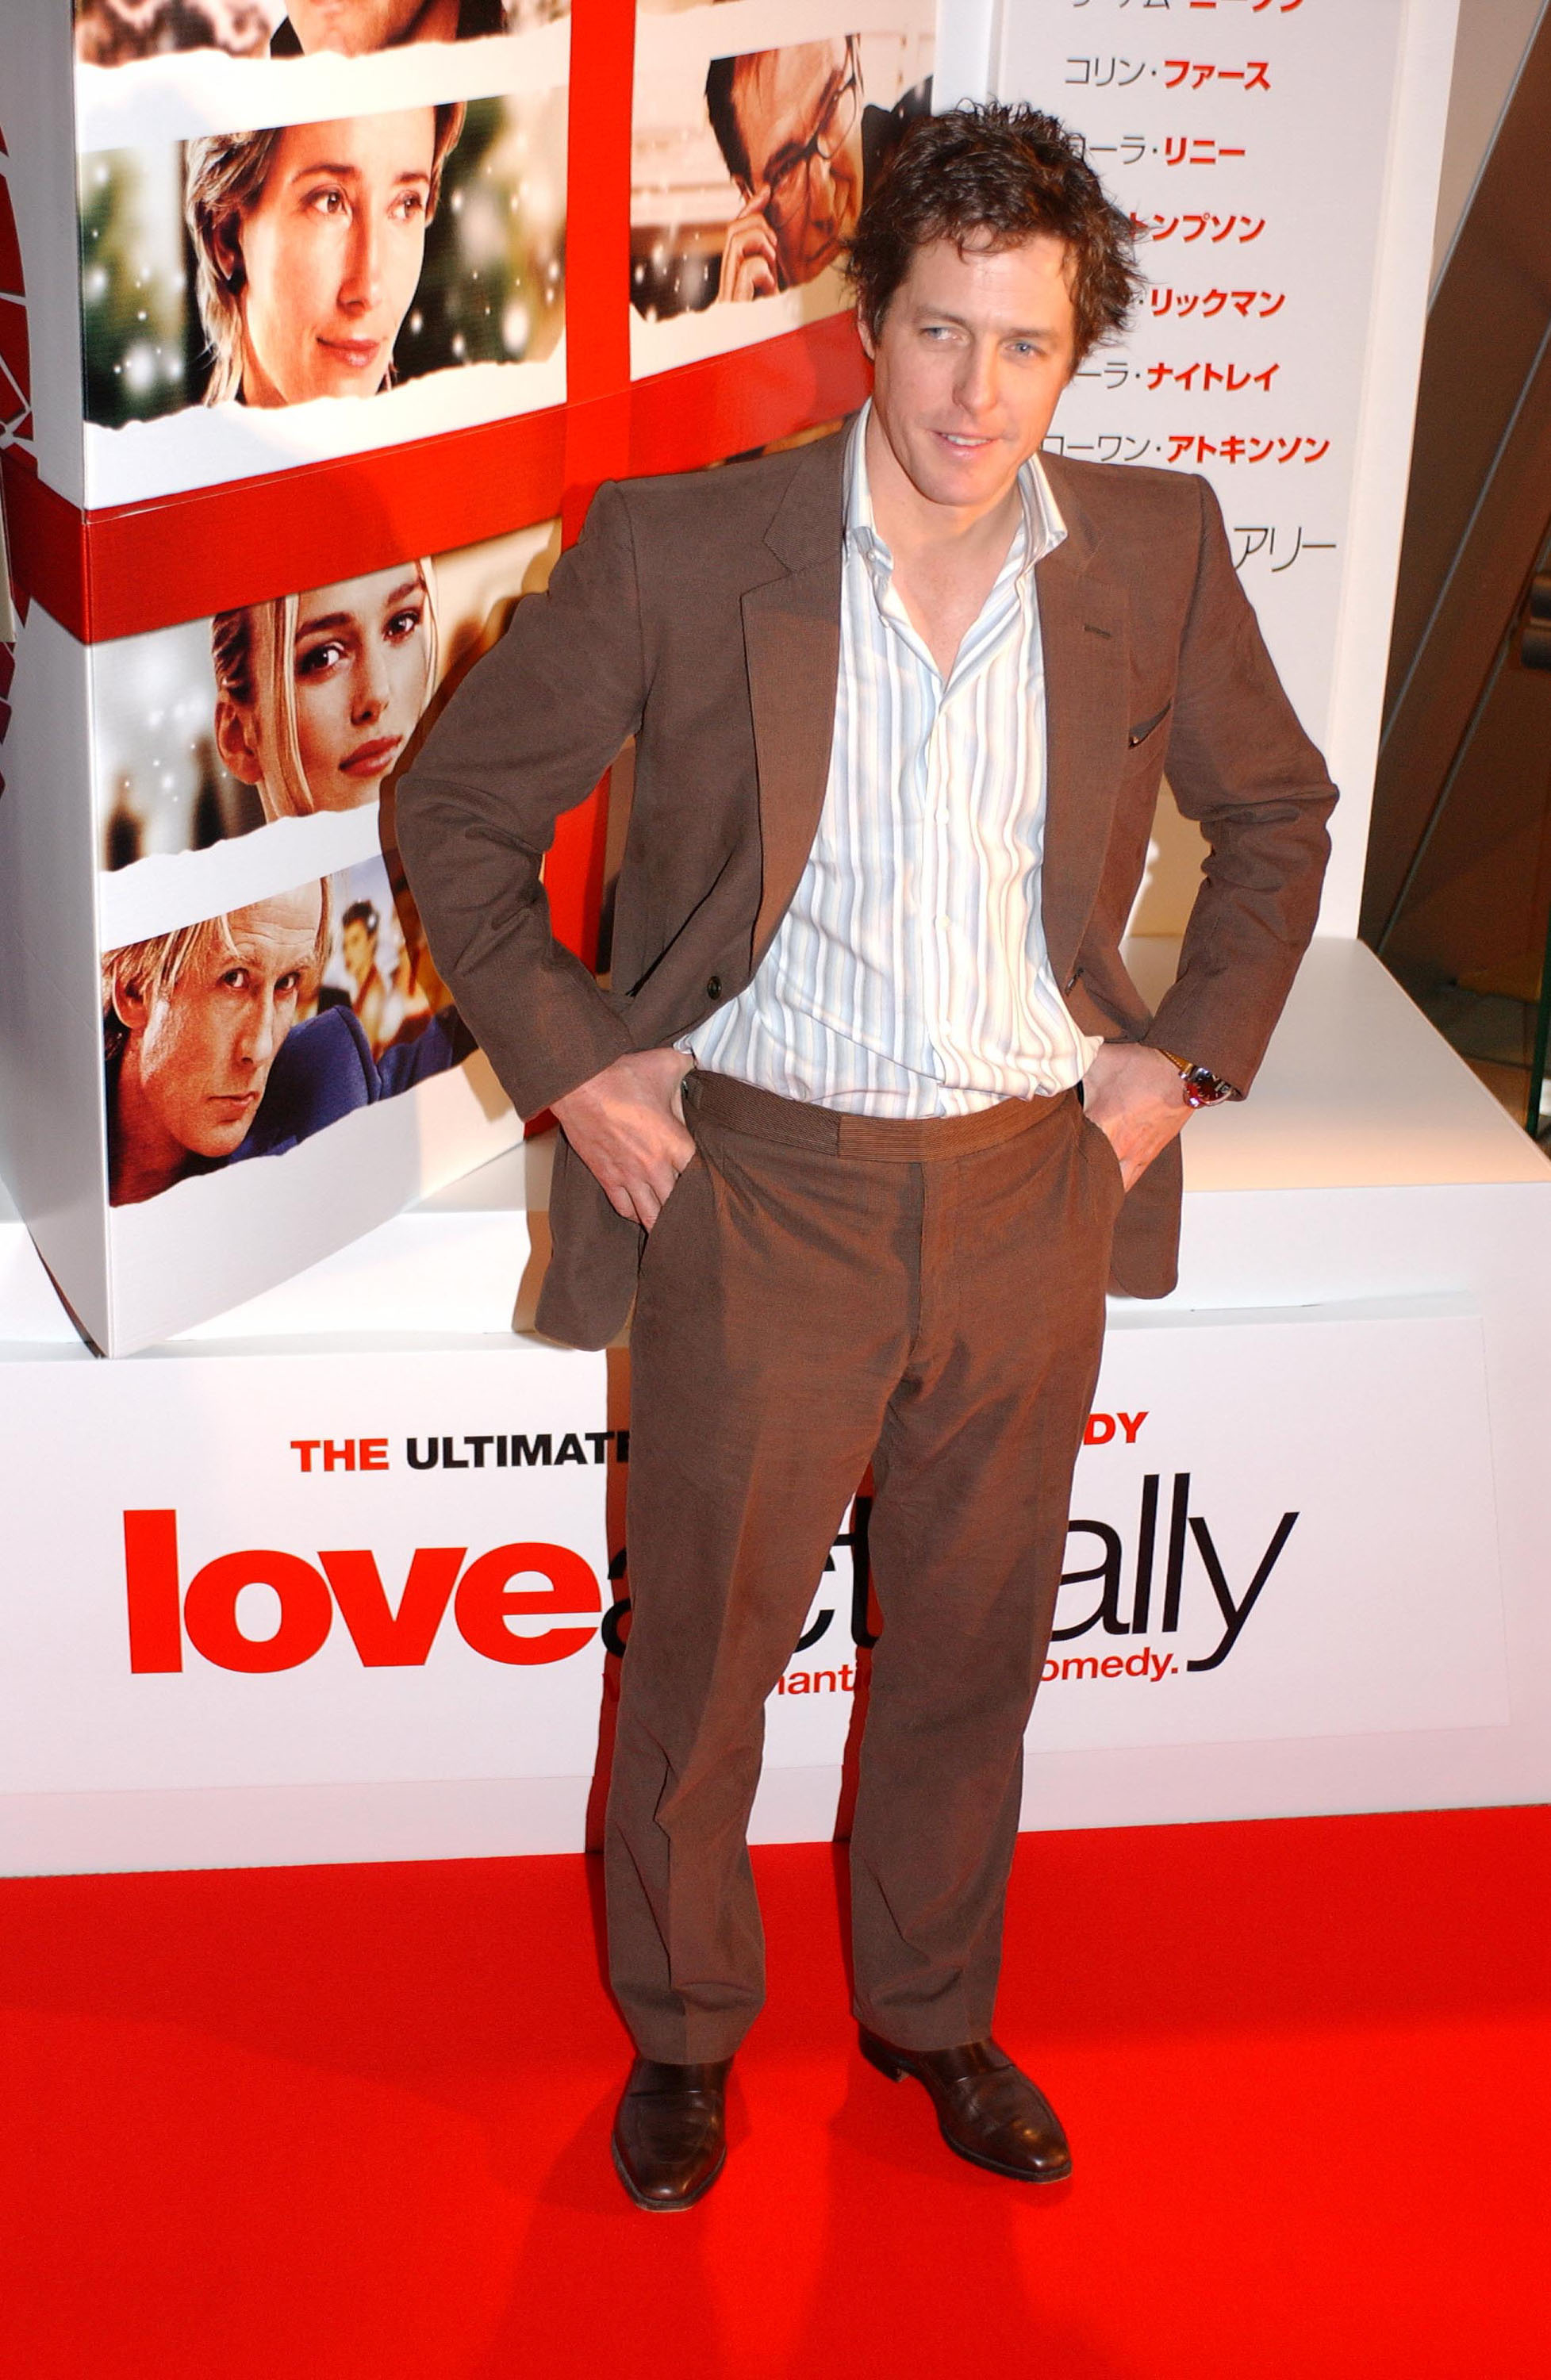 Hugh on the red carpet for the premiere of love actually